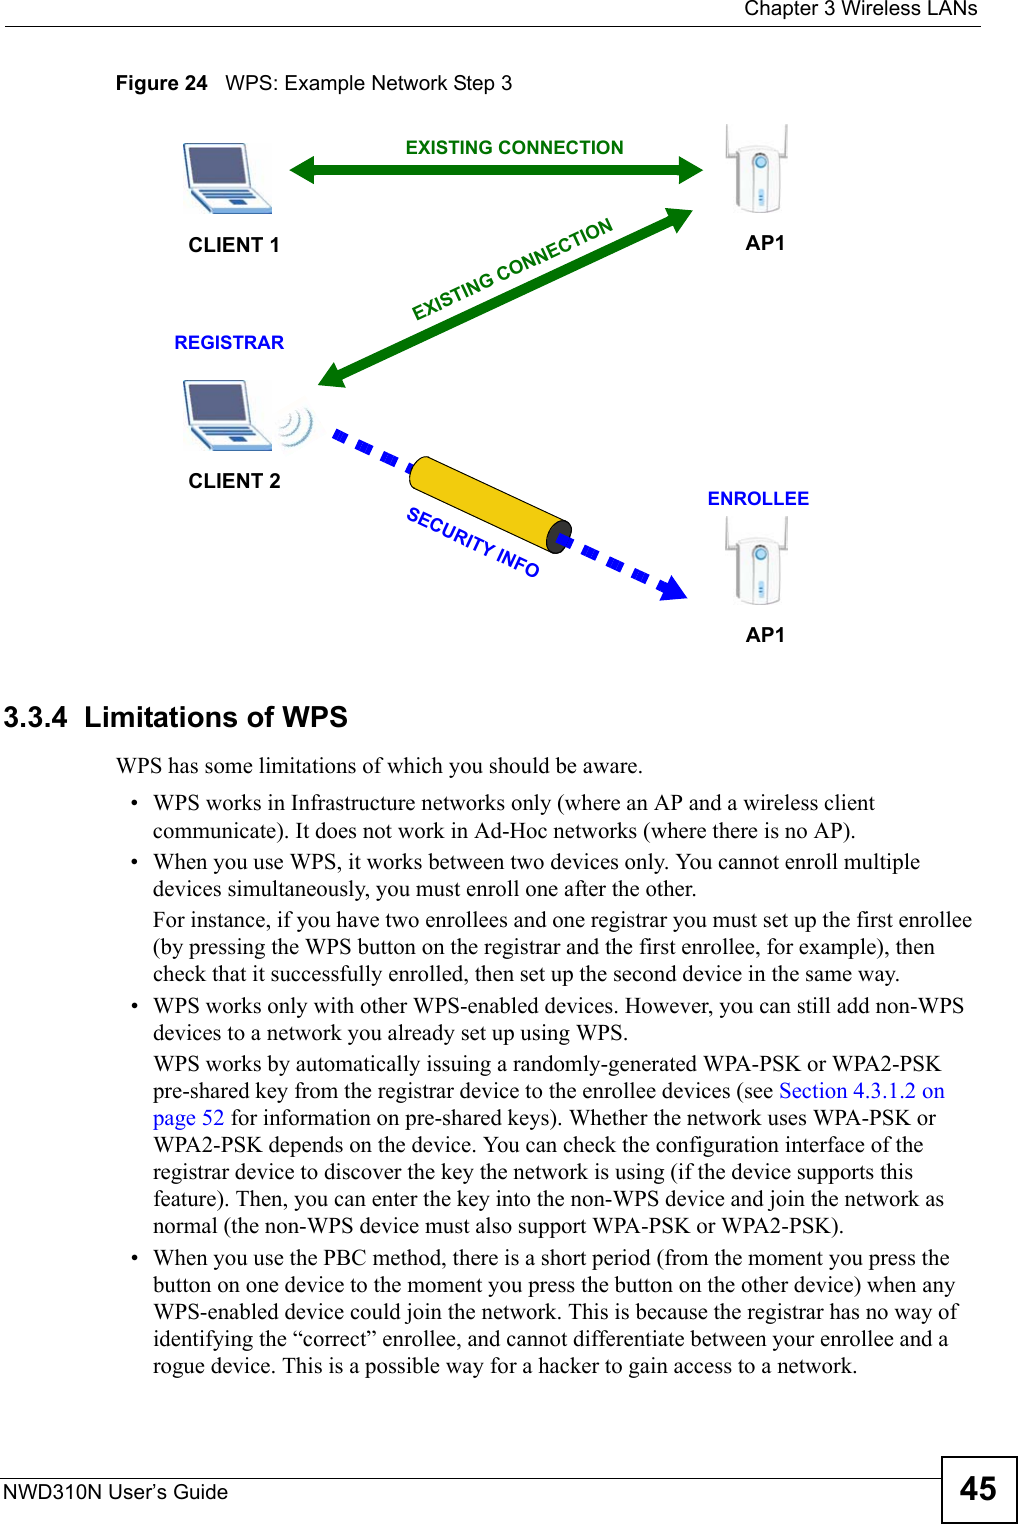  Chapter 3 Wireless LANsNWD310N User’s Guide 45Figure 24   WPS: Example Network Step 33.3.4  Limitations of WPSWPS has some limitations of which you should be aware. • WPS works in Infrastructure networks only (where an AP and a wireless client communicate). It does not work in Ad-Hoc networks (where there is no AP).• When you use WPS, it works between two devices only. You cannot enroll multiple devices simultaneously, you must enroll one after the other. For instance, if you have two enrollees and one registrar you must set up the first enrollee (by pressing the WPS button on the registrar and the first enrollee, for example), then check that it successfully enrolled, then set up the second device in the same way.• WPS works only with other WPS-enabled devices. However, you can still add non-WPS devices to a network you already set up using WPS. WPS works by automatically issuing a randomly-generated WPA-PSK or WPA2-PSK pre-shared key from the registrar device to the enrollee devices (see Section 4.3.1.2 on page 52 for information on pre-shared keys). Whether the network uses WPA-PSK or WPA2-PSK depends on the device. You can check the configuration interface of the registrar device to discover the key the network is using (if the device supports this feature). Then, you can enter the key into the non-WPS device and join the network as normal (the non-WPS device must also support WPA-PSK or WPA2-PSK).• When you use the PBC method, there is a short period (from the moment you press the button on one device to the moment you press the button on the other device) when any WPS-enabled device could join the network. This is because the registrar has no way of identifying the “correct” enrollee, and cannot differentiate between your enrollee and a rogue device. This is a possible way for a hacker to gain access to a network.CLIENT 1 AP1REGISTRARCLIENT 2EXISTING CONNECTIONSECURITY INFOENROLLEEAP1EXISTING CONNECTION